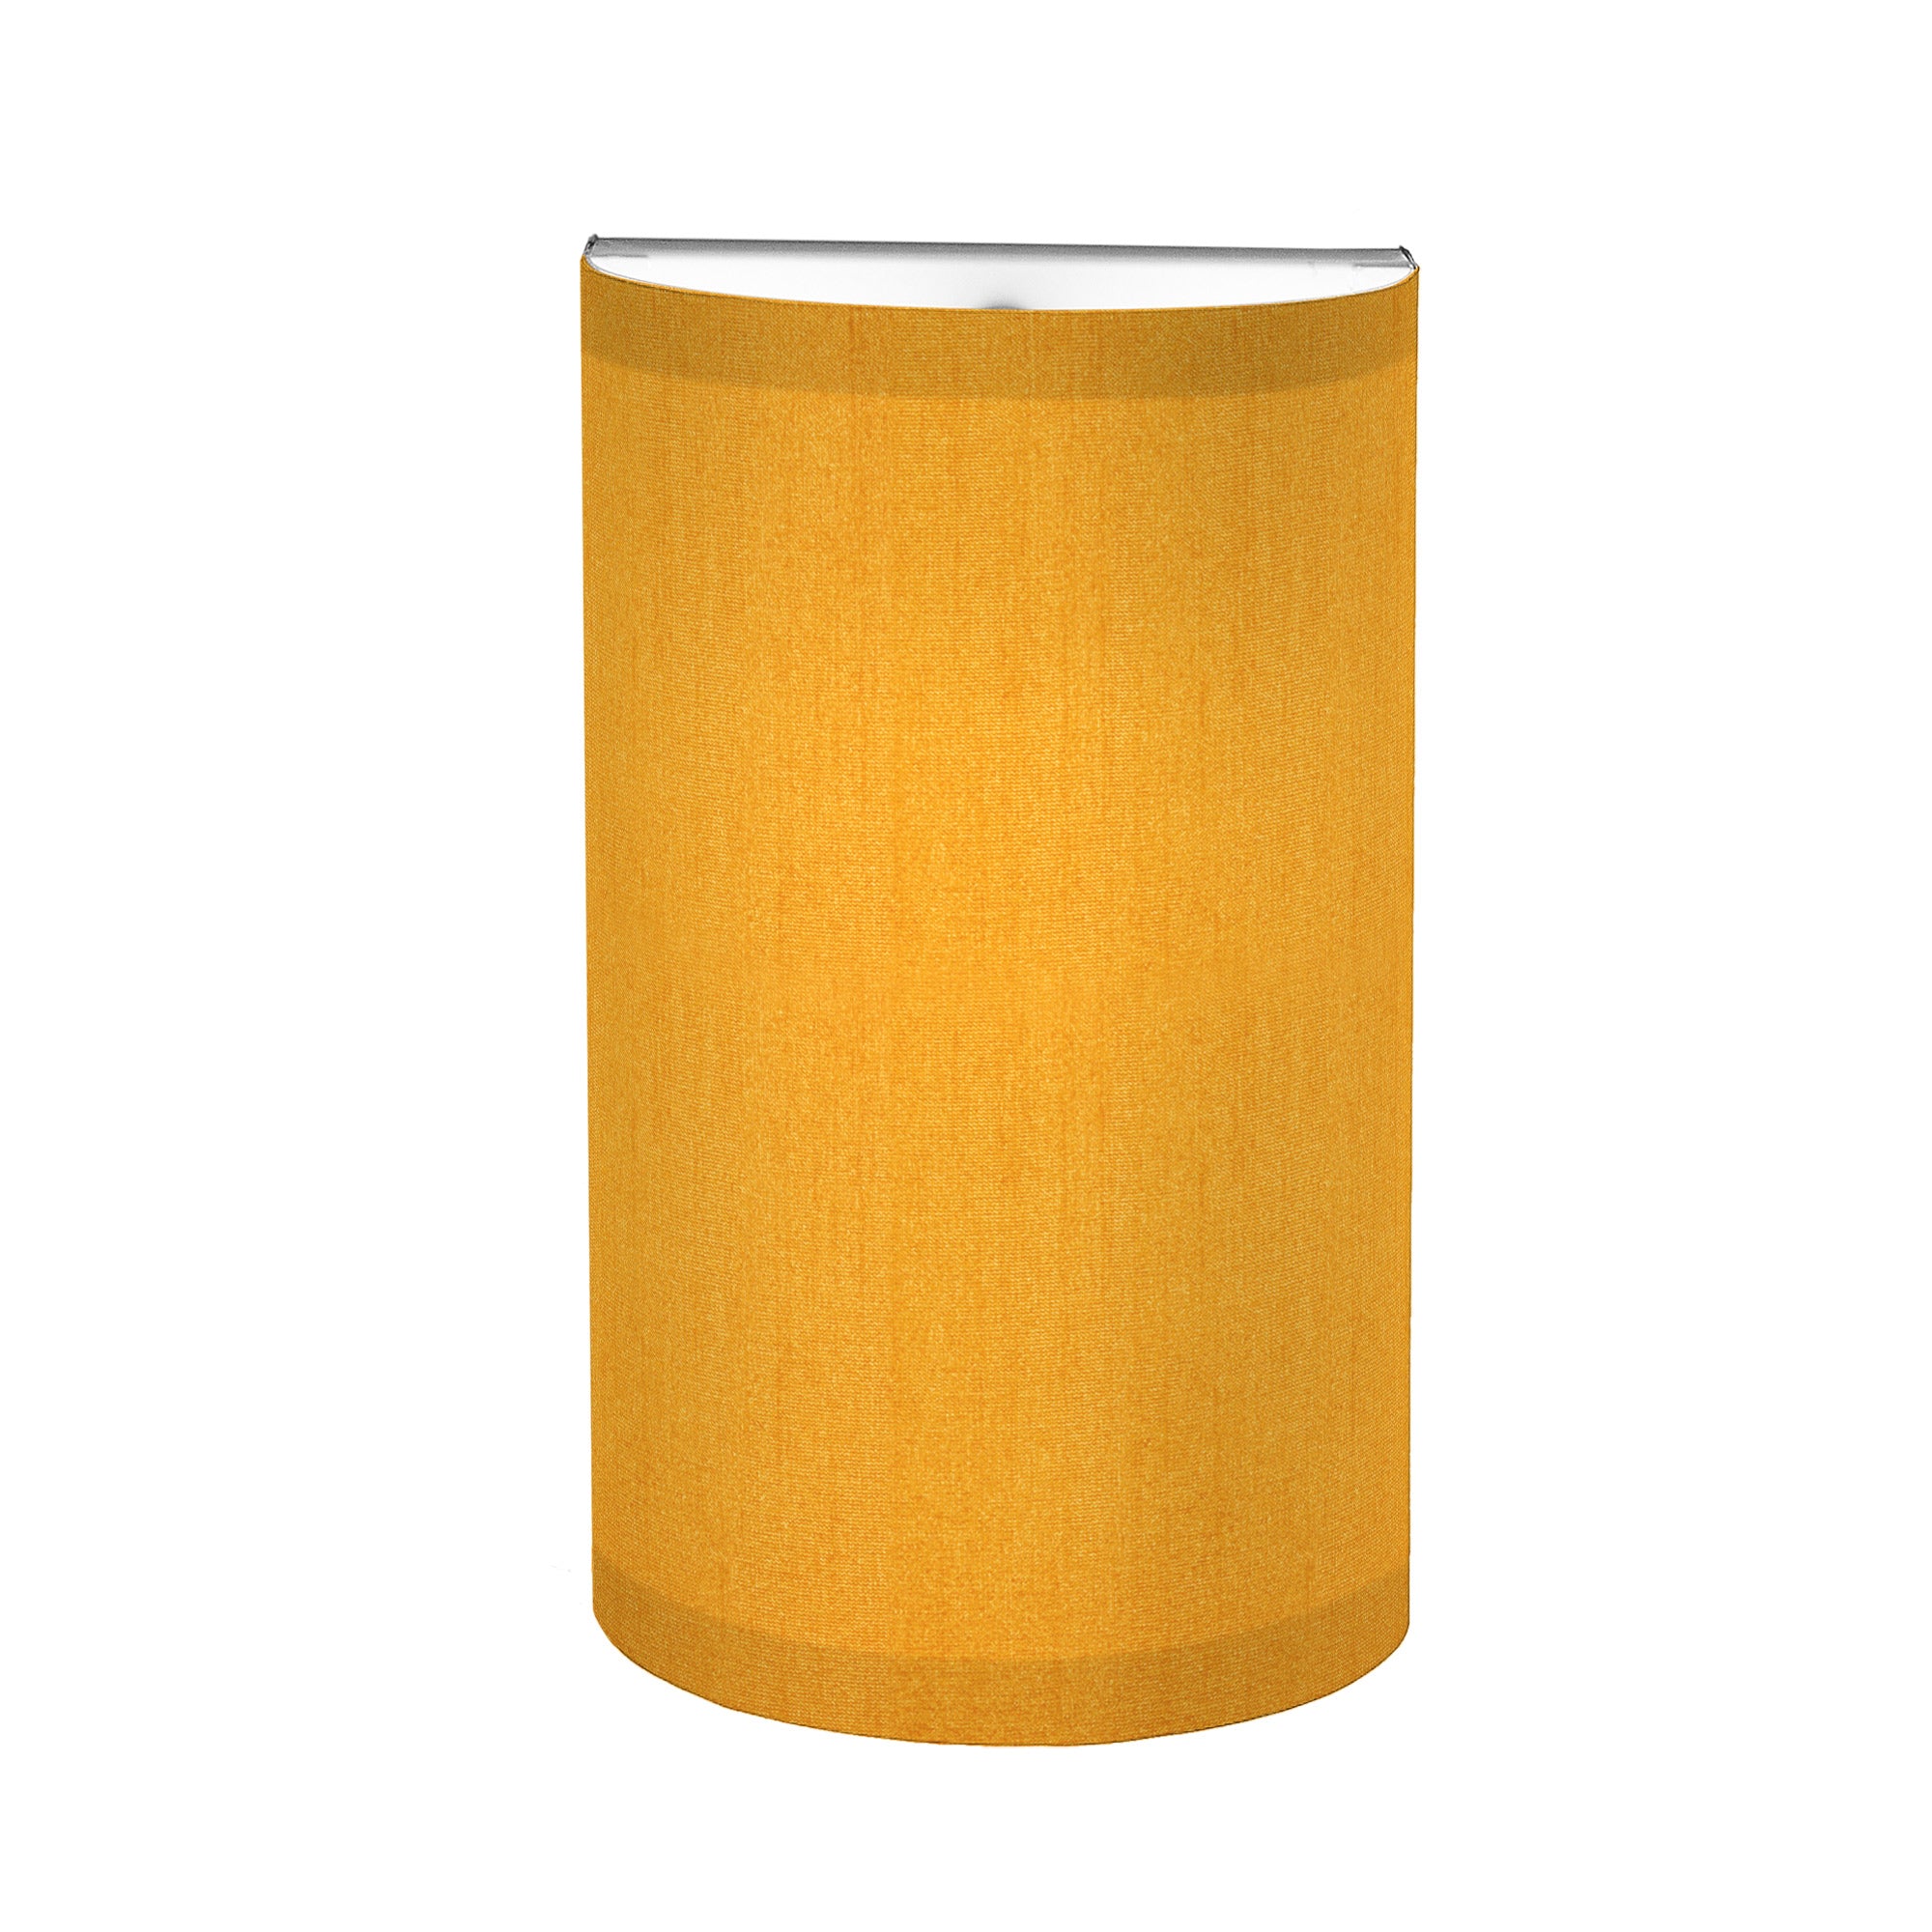 The Myra Wall Sconce from Seascape Fixtures in silk, gold color.